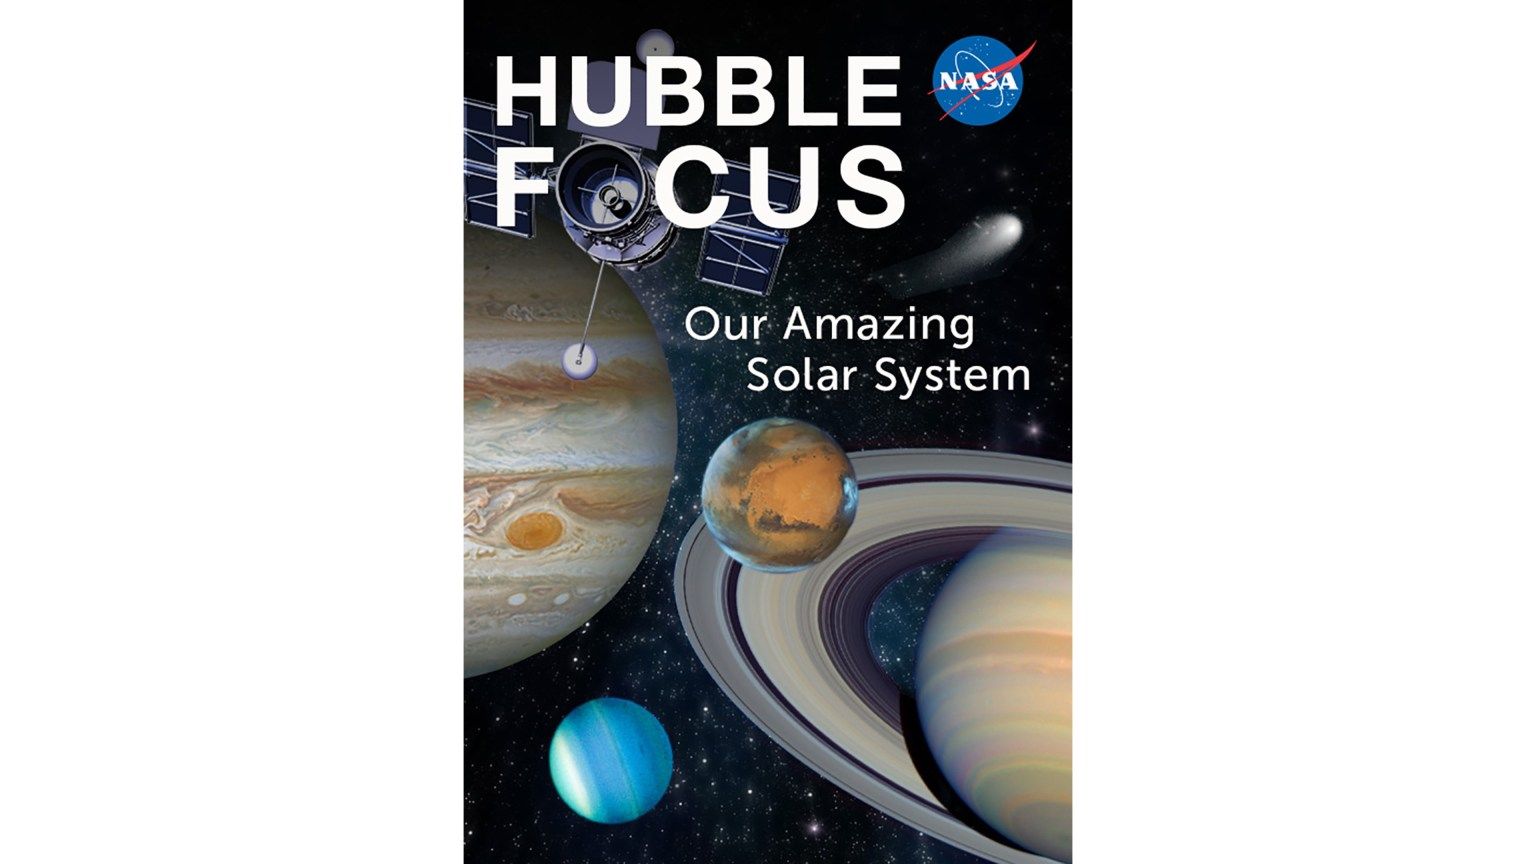 Hubble Focus-Our Amazing Solar System e-book cover